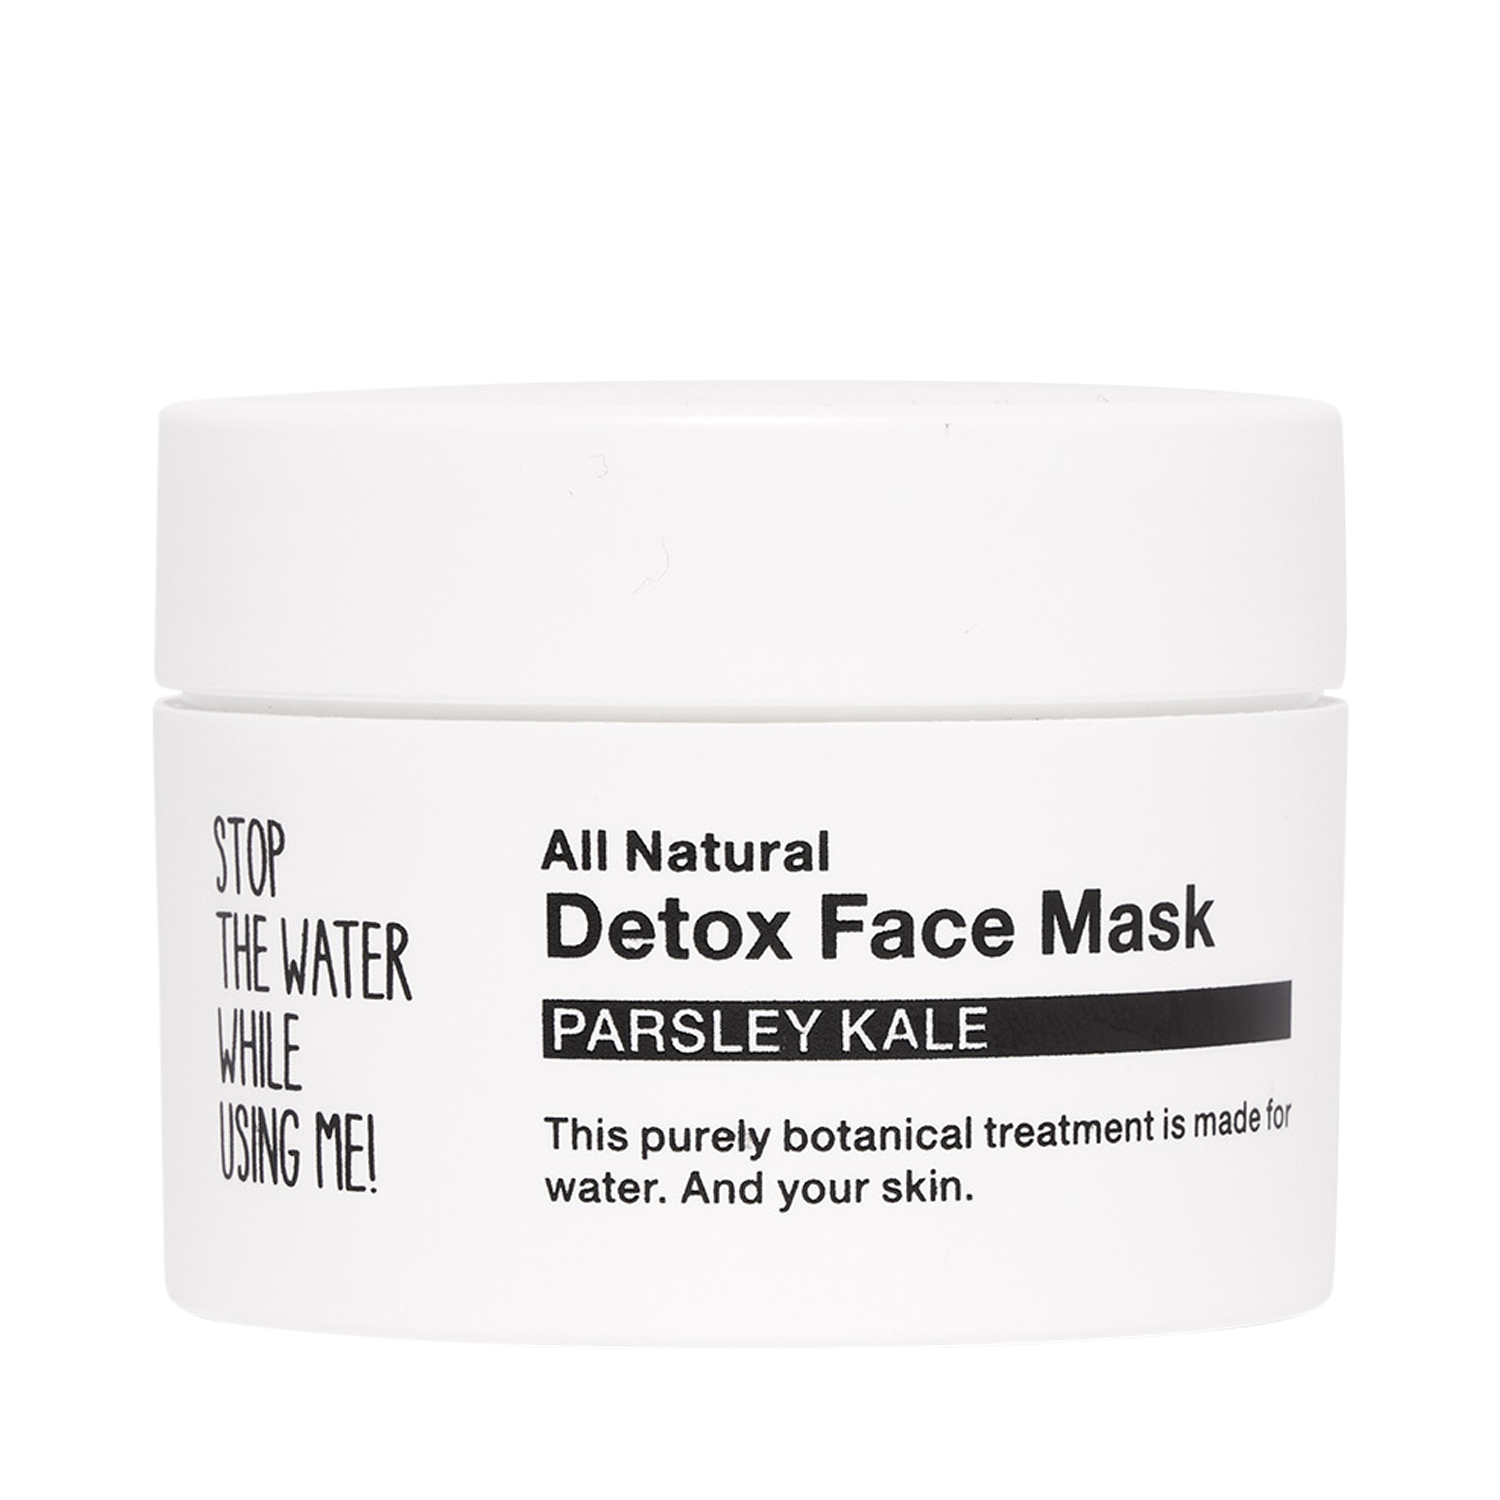 Stop The Water While Using Me! - All Natural Parsley Kale Detox Face Mask - Gesichtsmaske